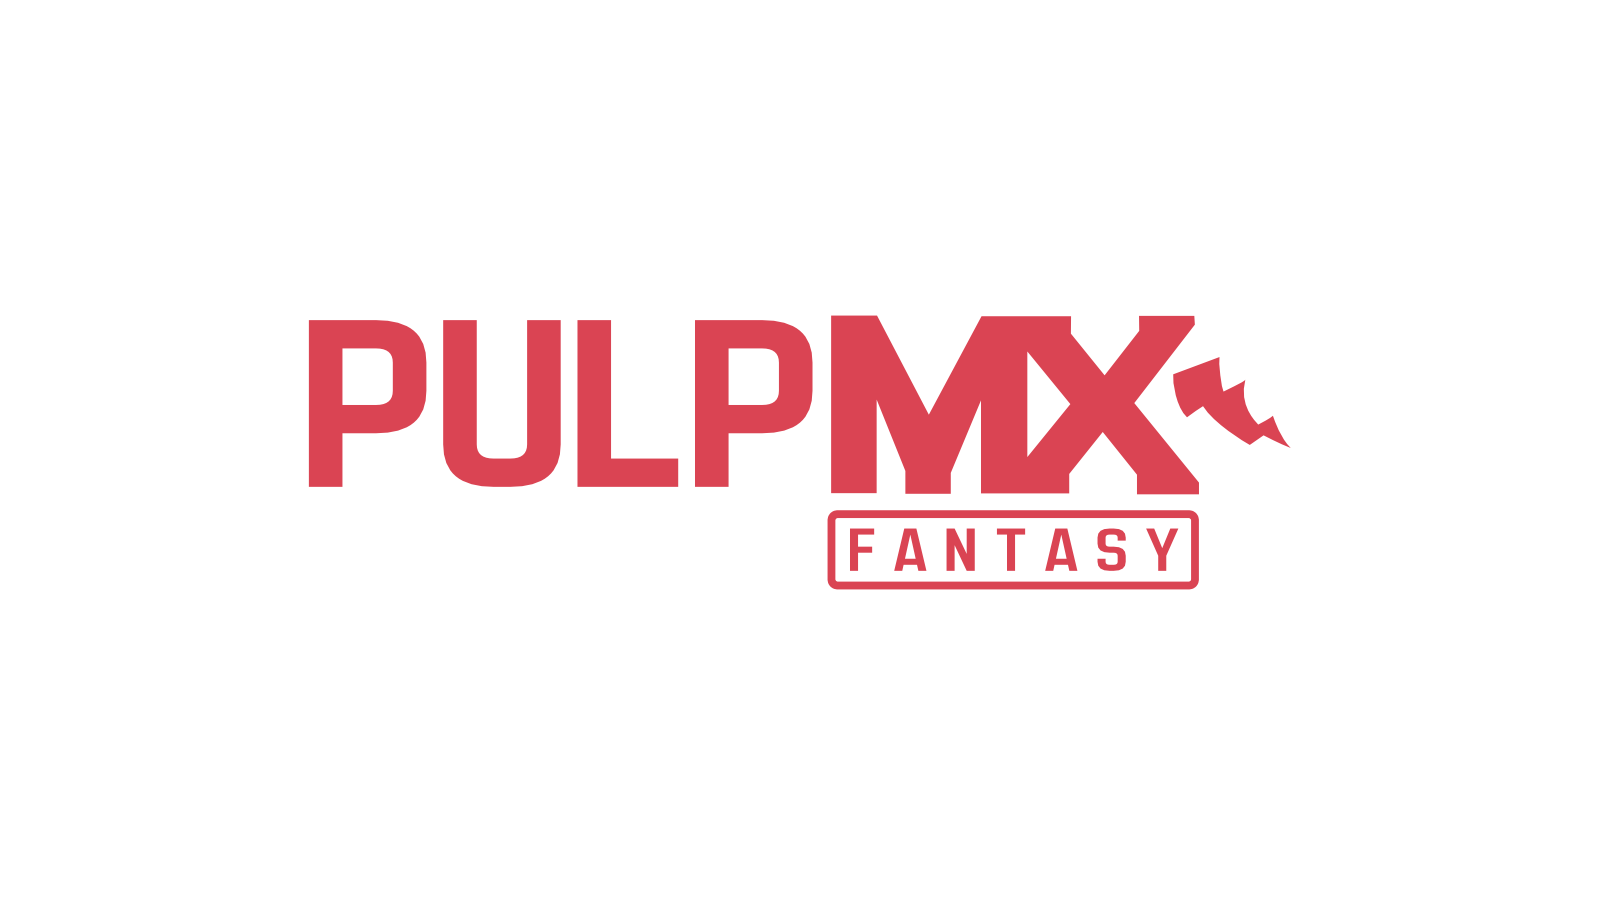 PulpMX Fantasy is the premiere destination for fantasy supercross and motocross play with leagues, prizes, stats, and more. Fantasy SX and fantasy MX is the easiest way to enhance your viewing experience.